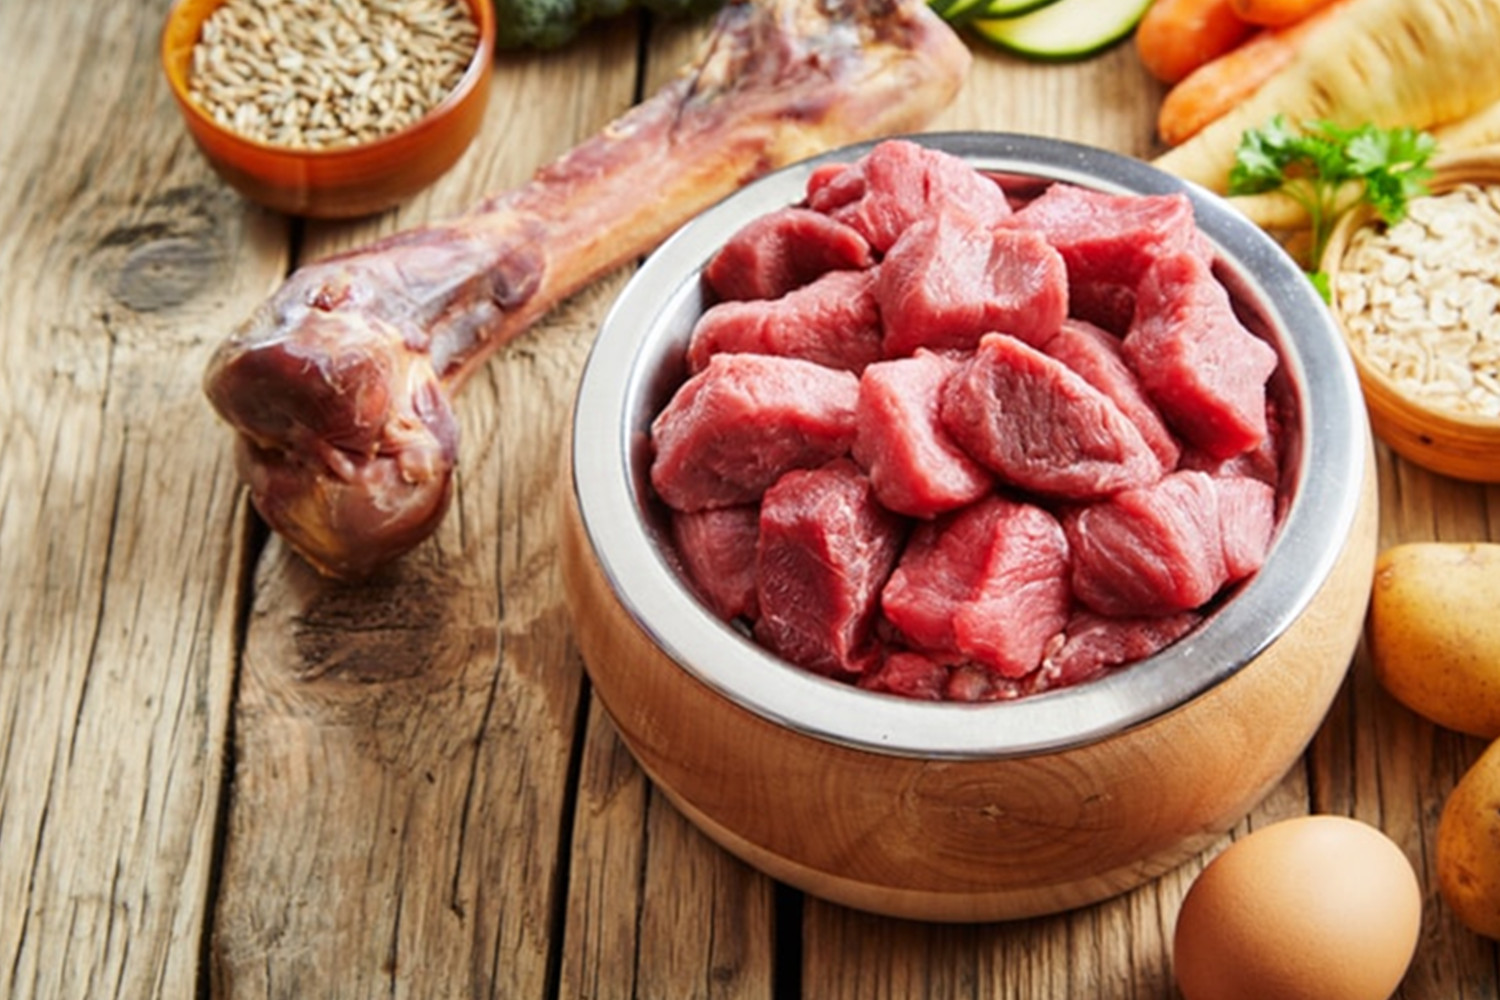 The Best Dog Food, Raw, Or Cooked?